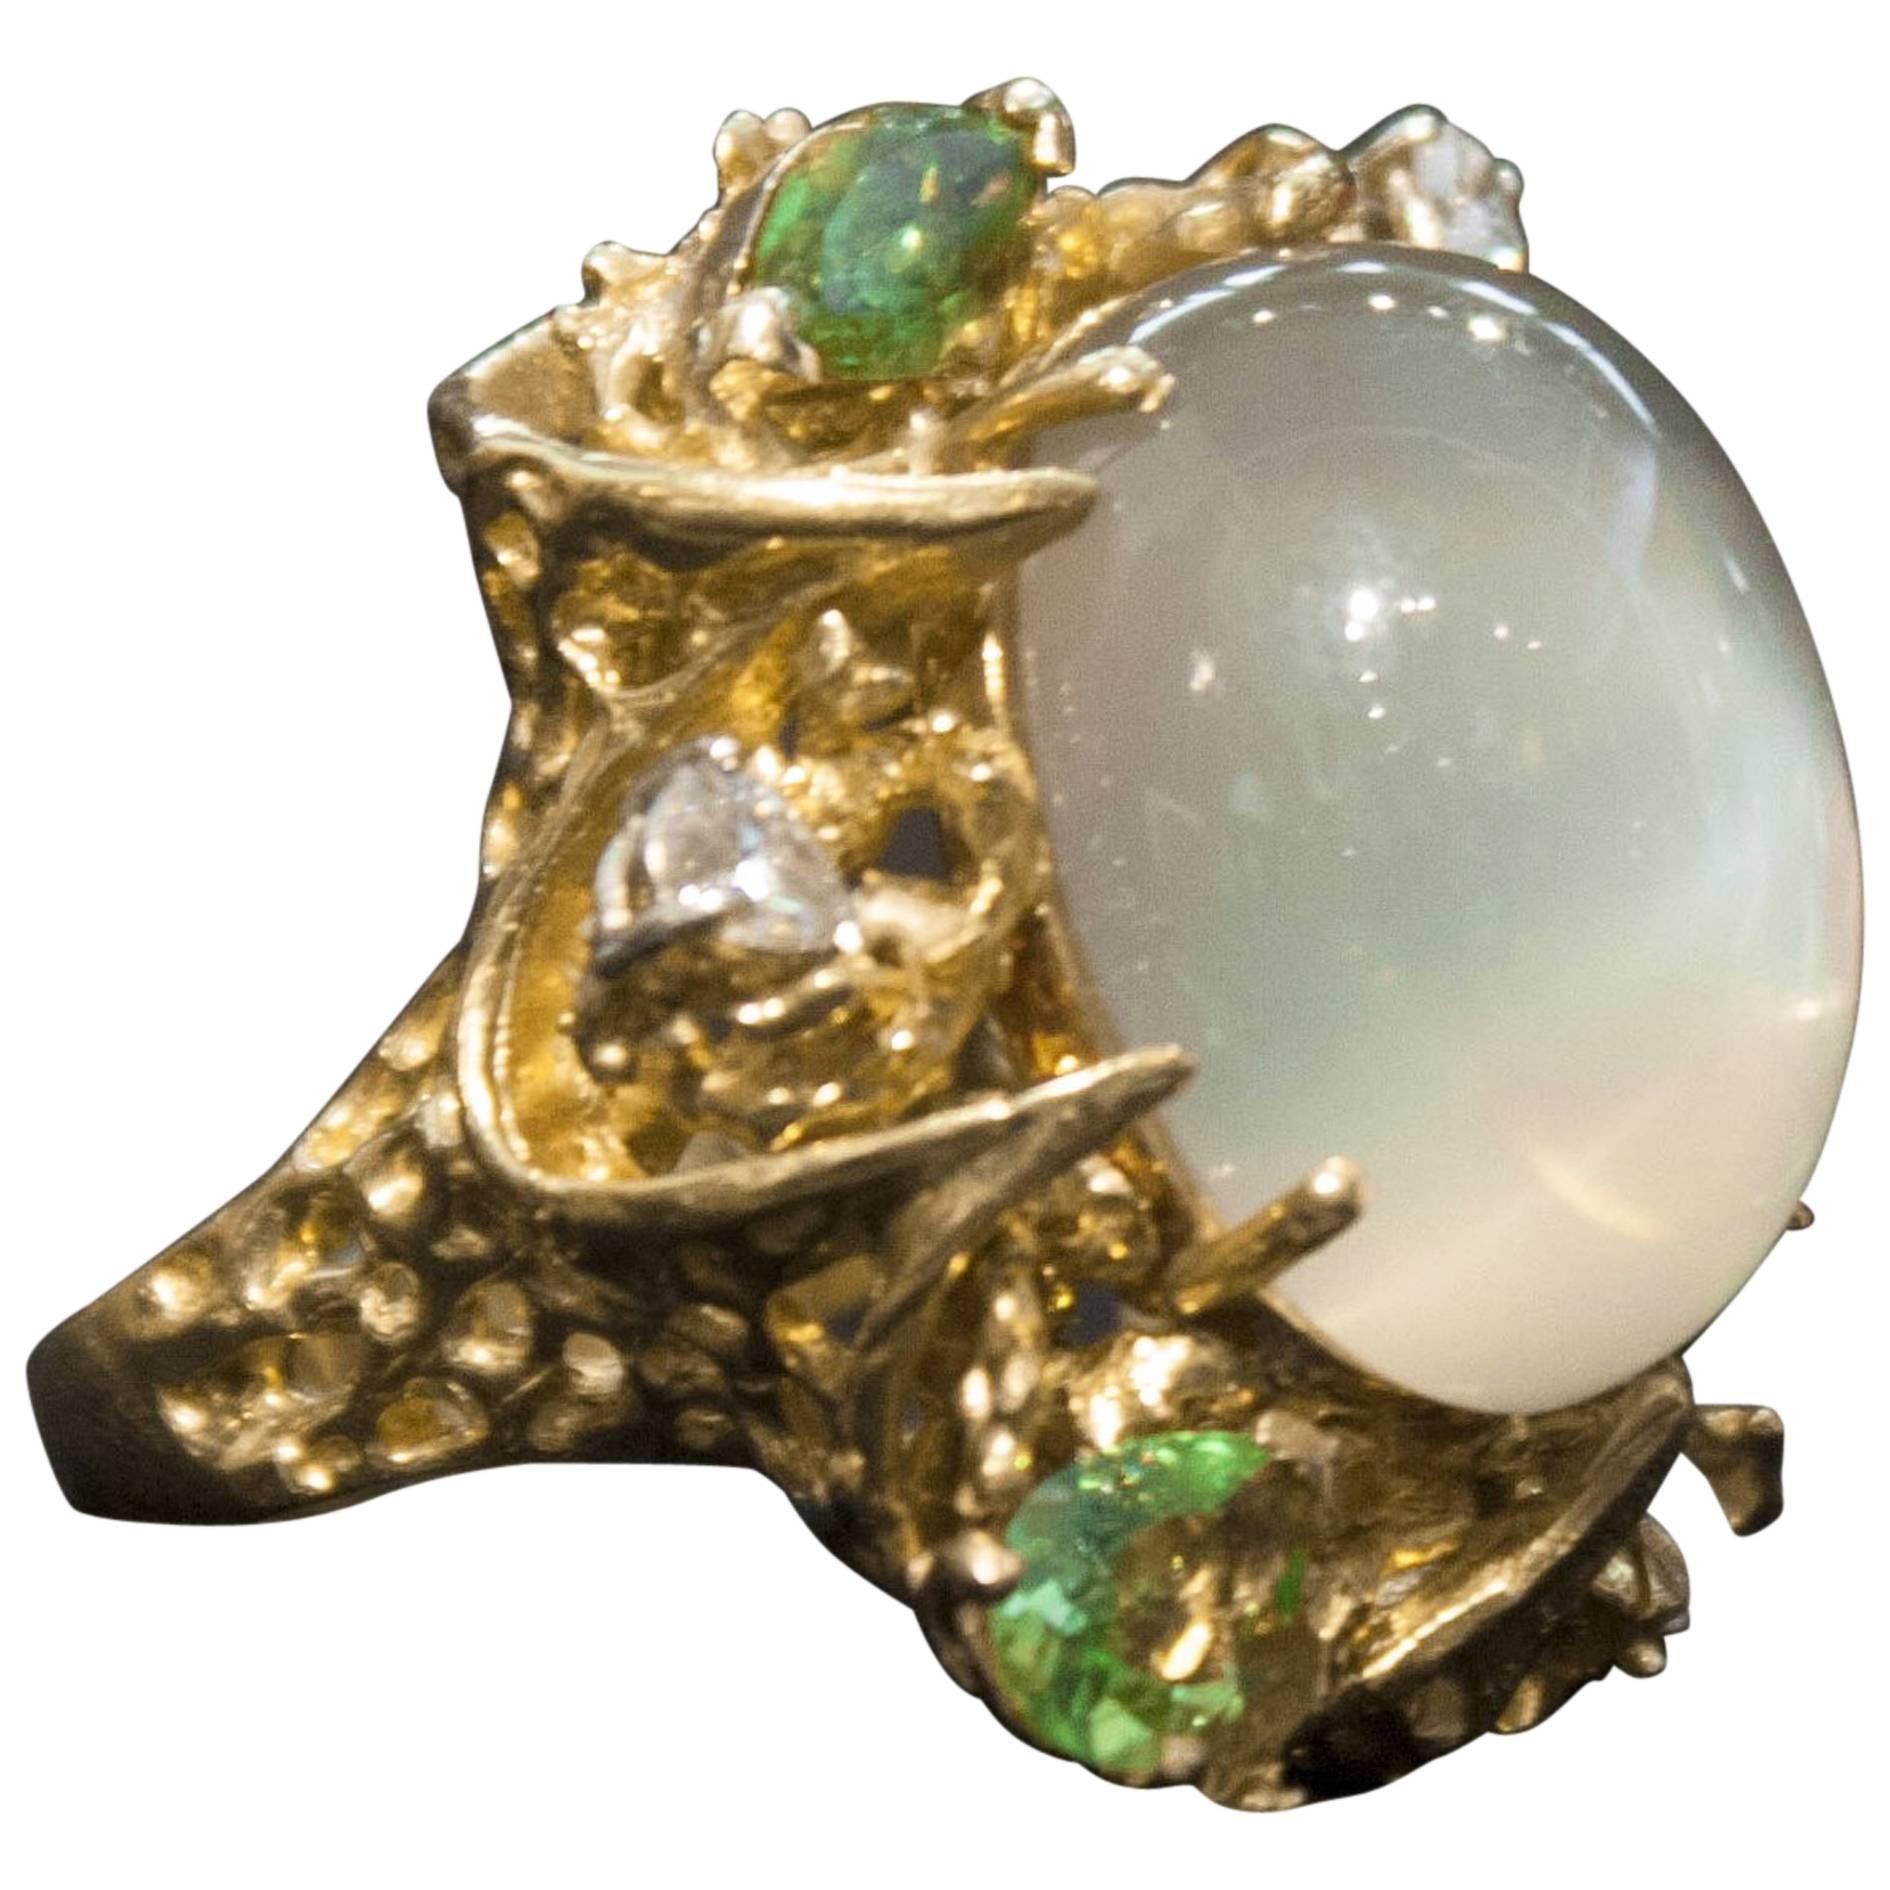 1960's Large Moonstone Organic Free Form Gold Ring with Diamond and Peridot